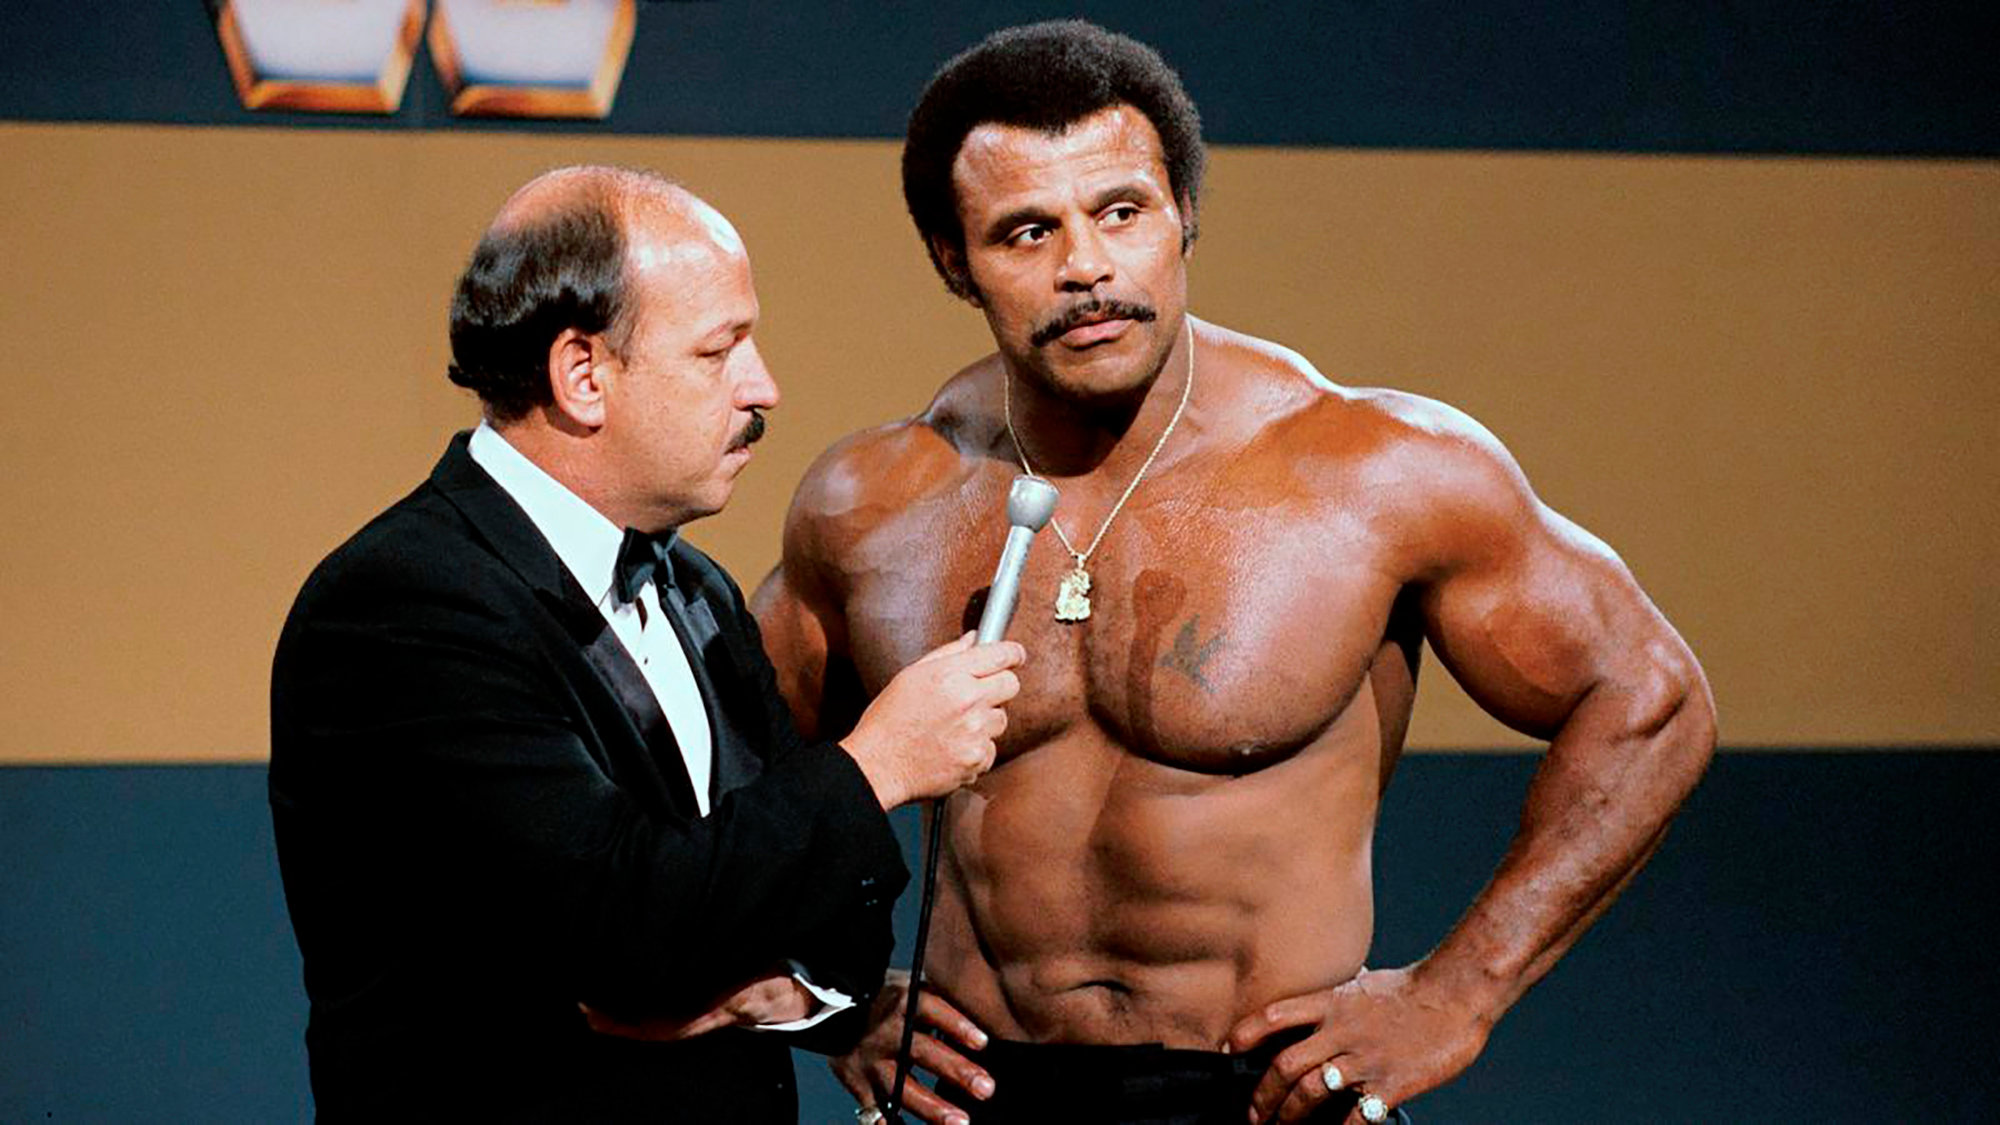 Rocky Johnson is the father of Dwayne Johnson AKA The Rock